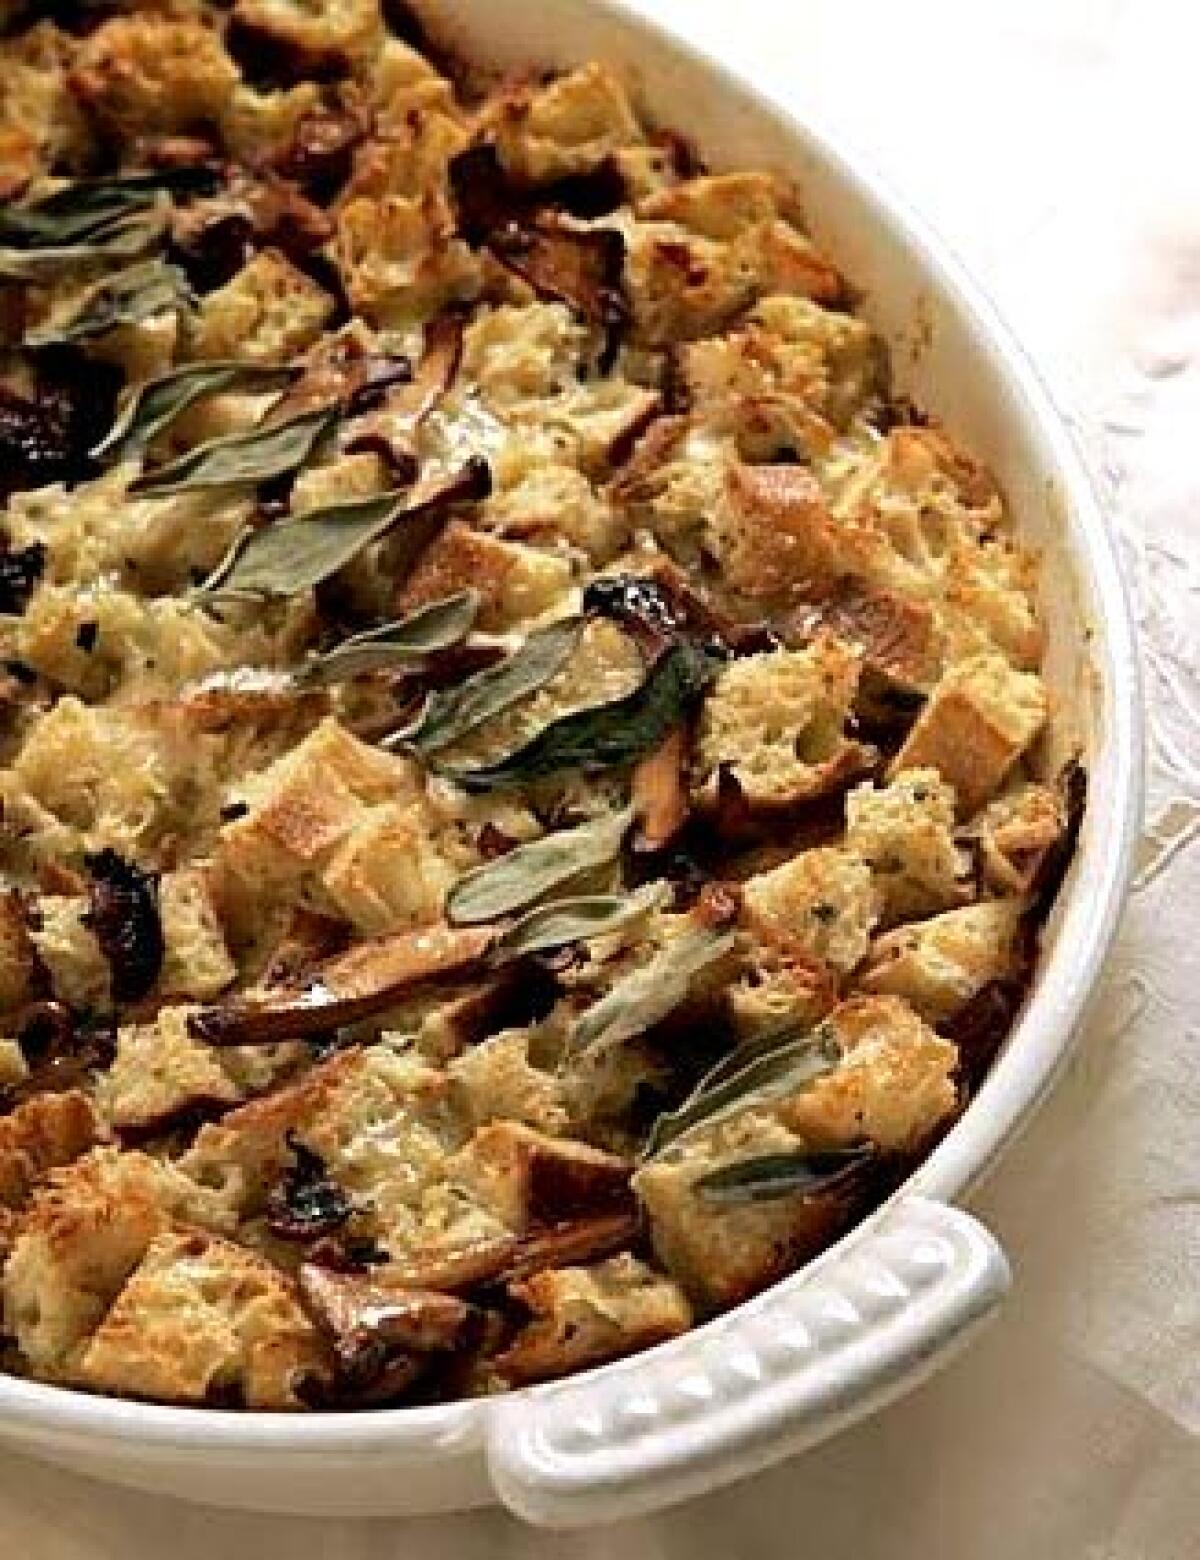 This savory bread pudding is studded with chanterelles.